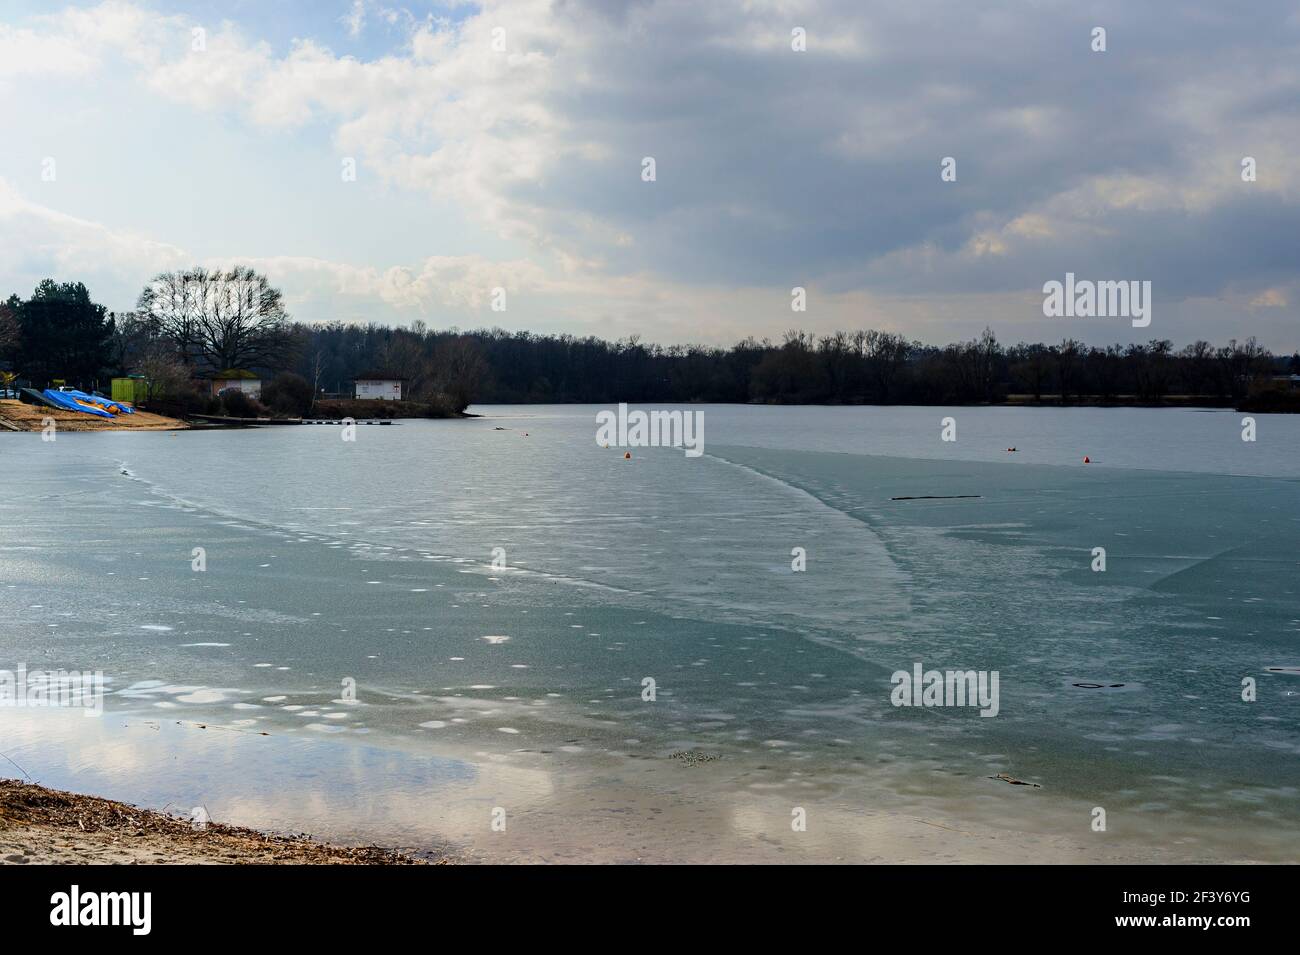 Frozen lake in Alsace, France. A thin film of ice covers the surface of the water. Stock Photo